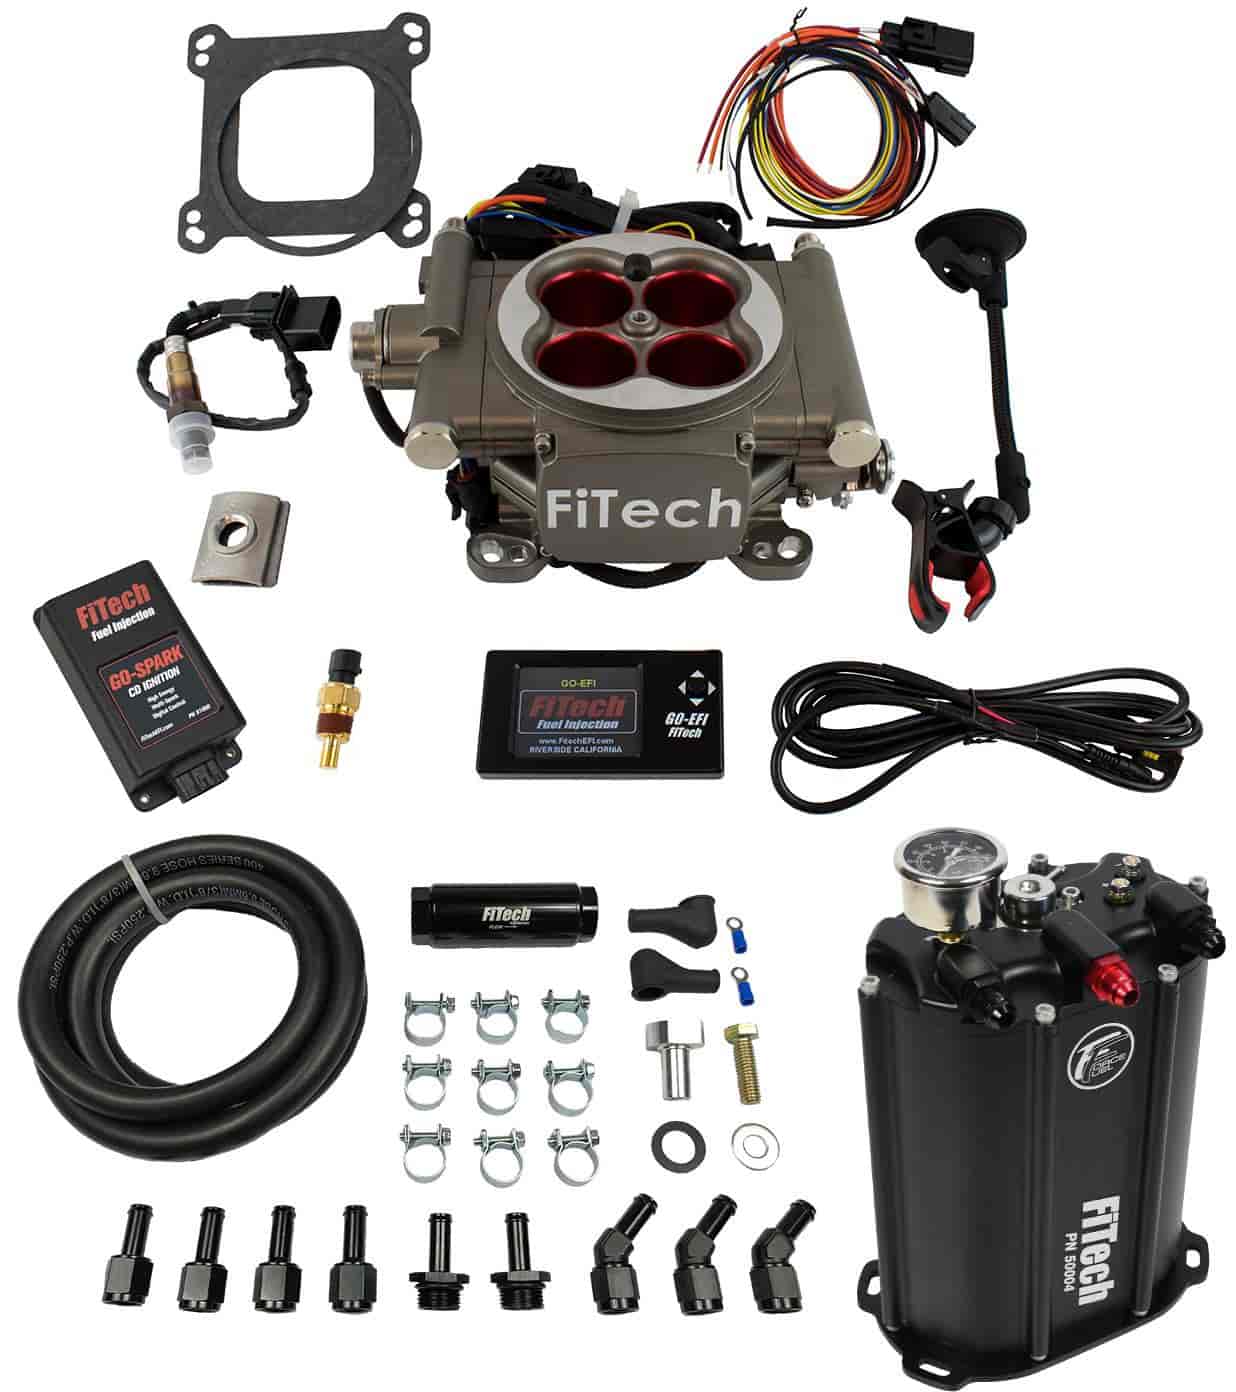 GoStreet EFI 400 HP Throttle Body Fuel Injection Master Kit [with Force Fuel System & CDI Box] Natural Aluminum